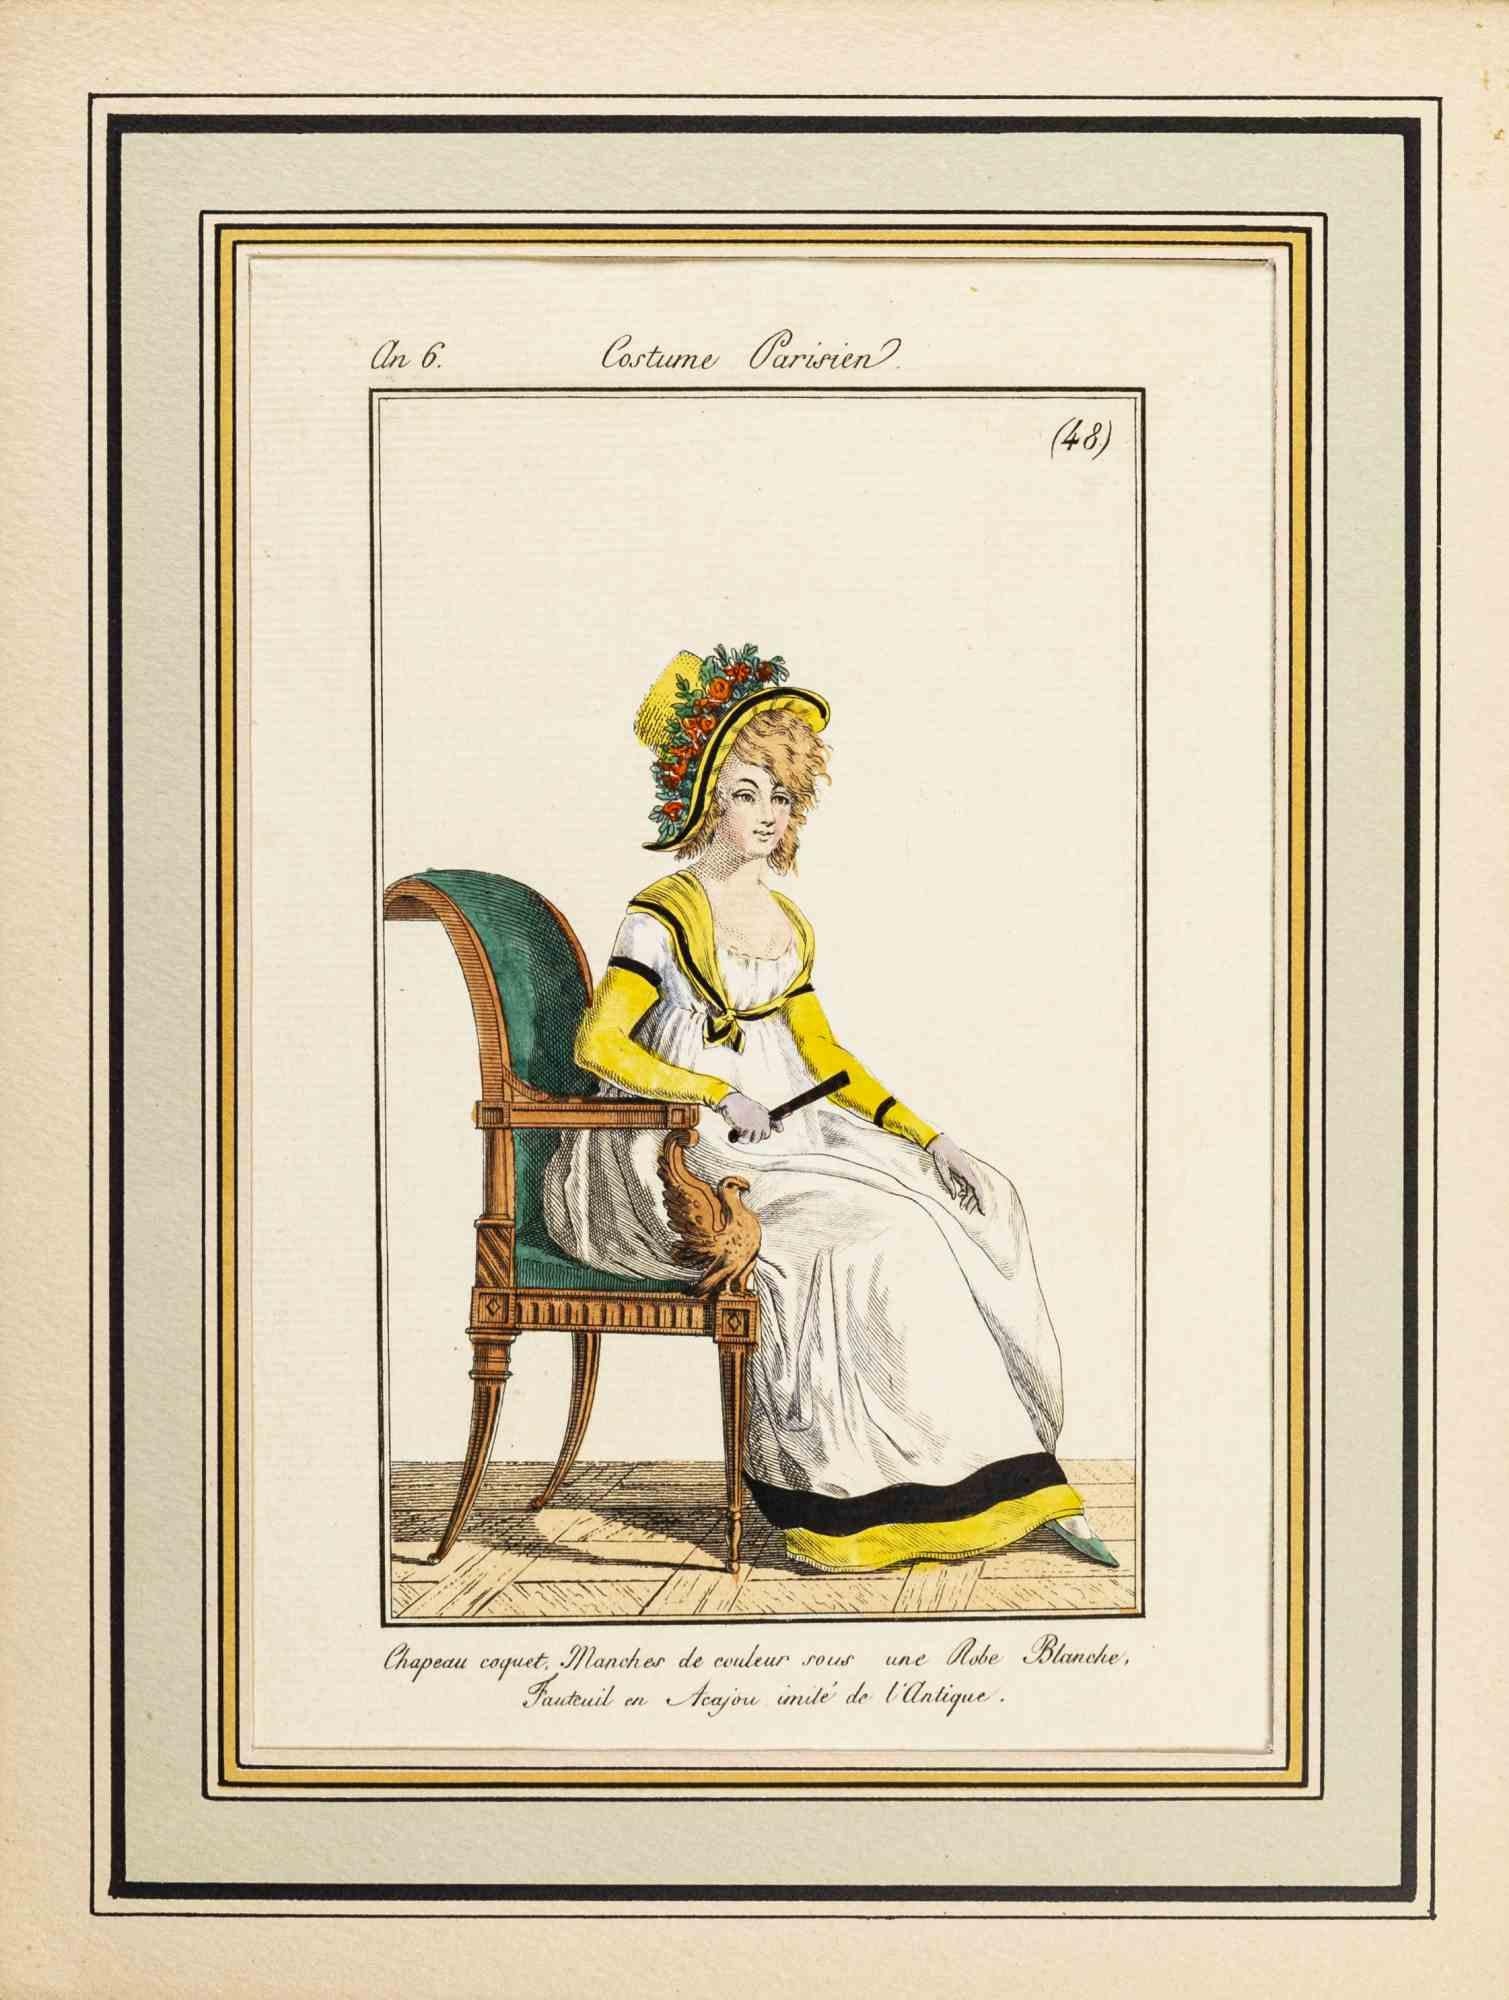 Chapeau Coquet is an Original Etching Hand Watercolored series "Costumes Parisiens" published in 1797 by the Journald des Dames et des Modes".

Costume Parisien - Model n. 48 is an original watercolored print realized in 1797. 

The artwork is the